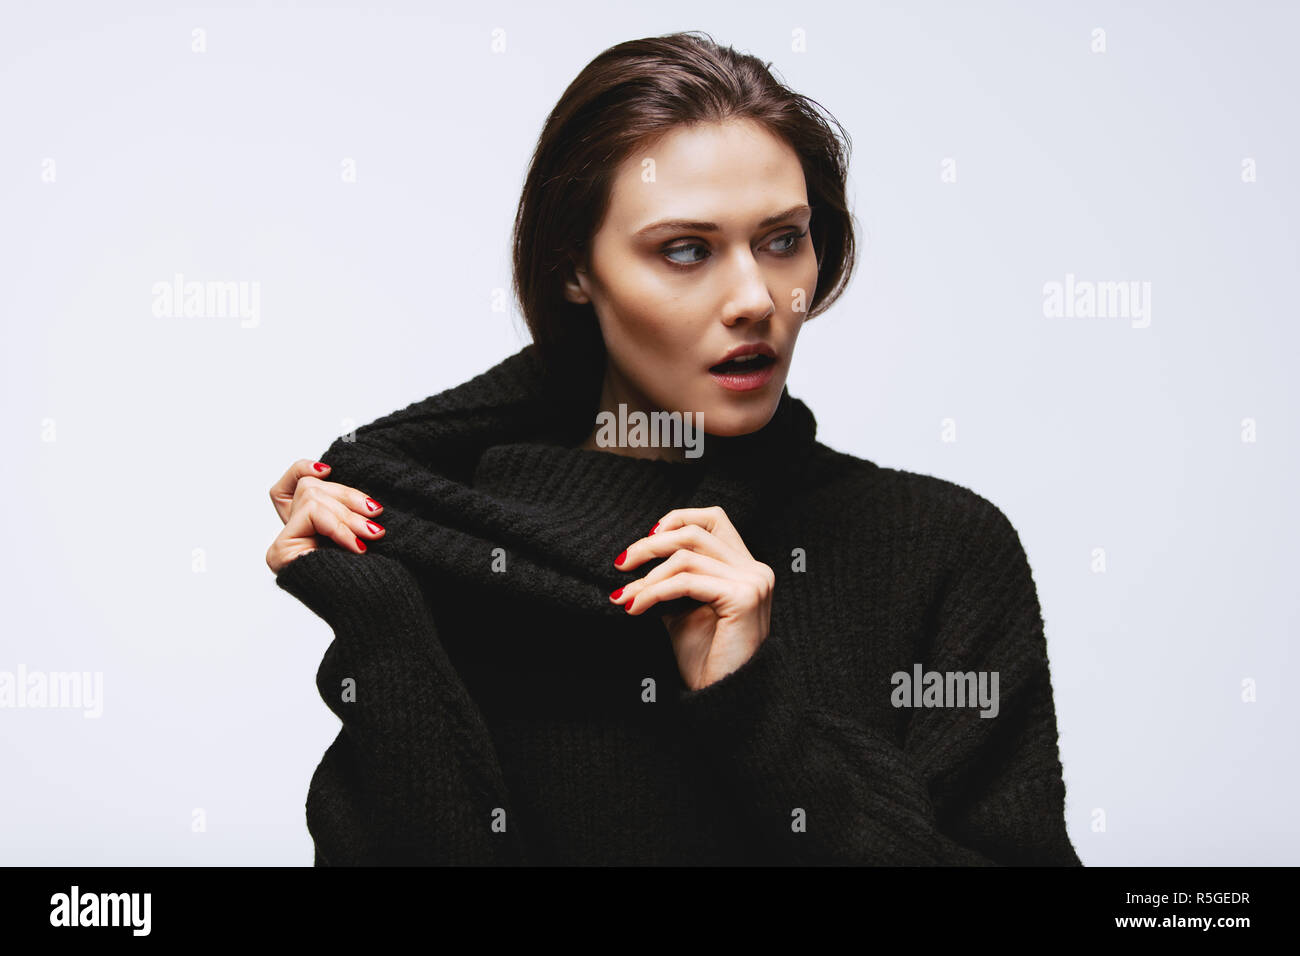 Attractive woman pulling the collar of her turtleneck sweater on white background. Caucasian female model with surprised look. Stock Photo